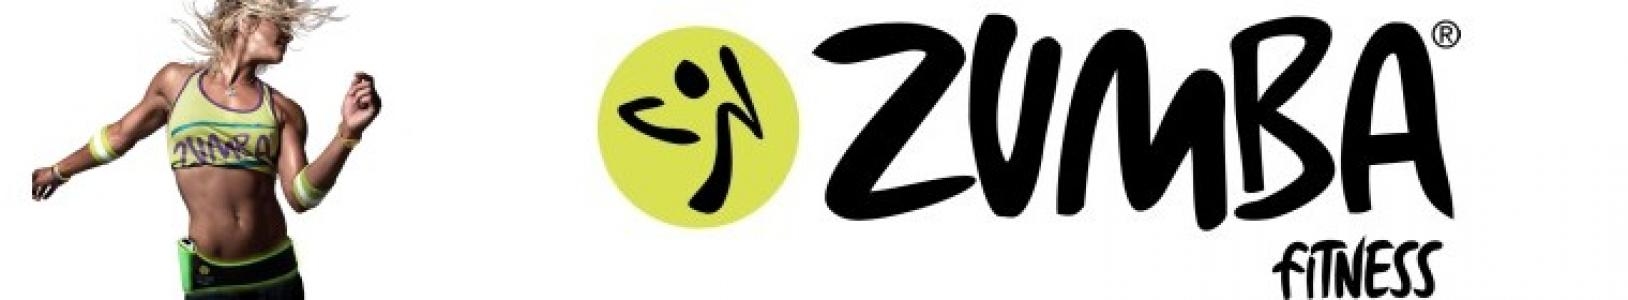 Zumba Fitness: Join the Party banner